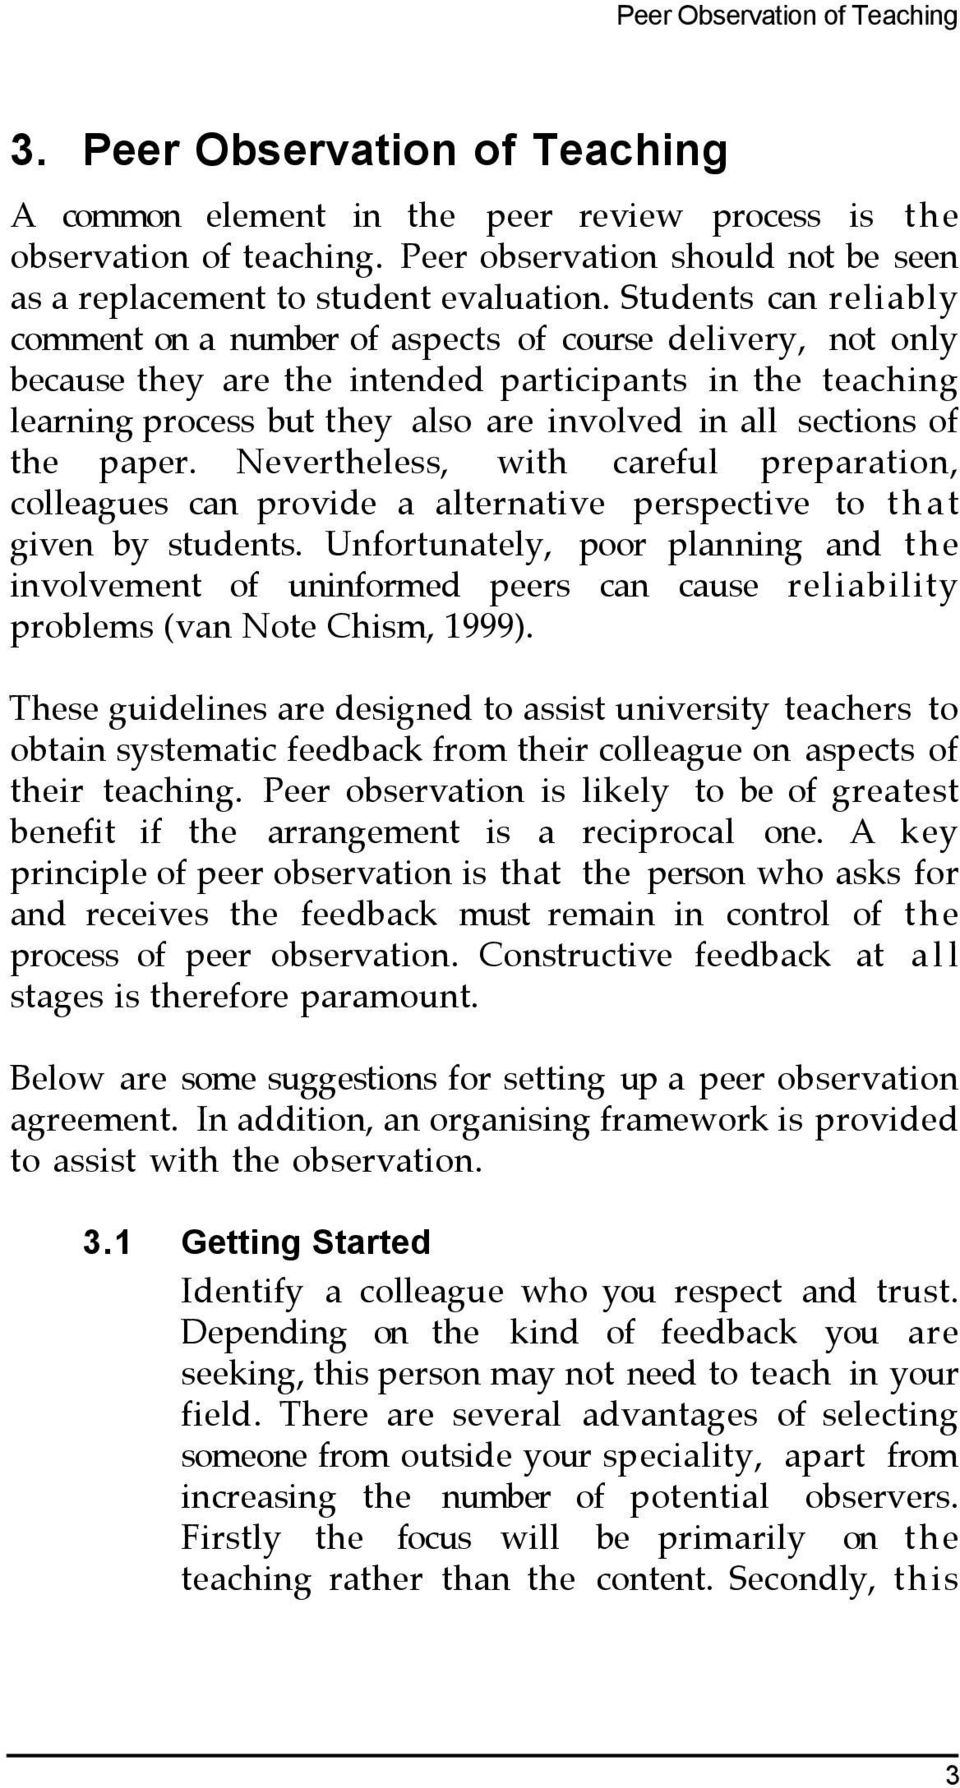 sections of the paper. Nevertheless, with careful preparation, colleagues can provide a alternative perspective to that given by students.